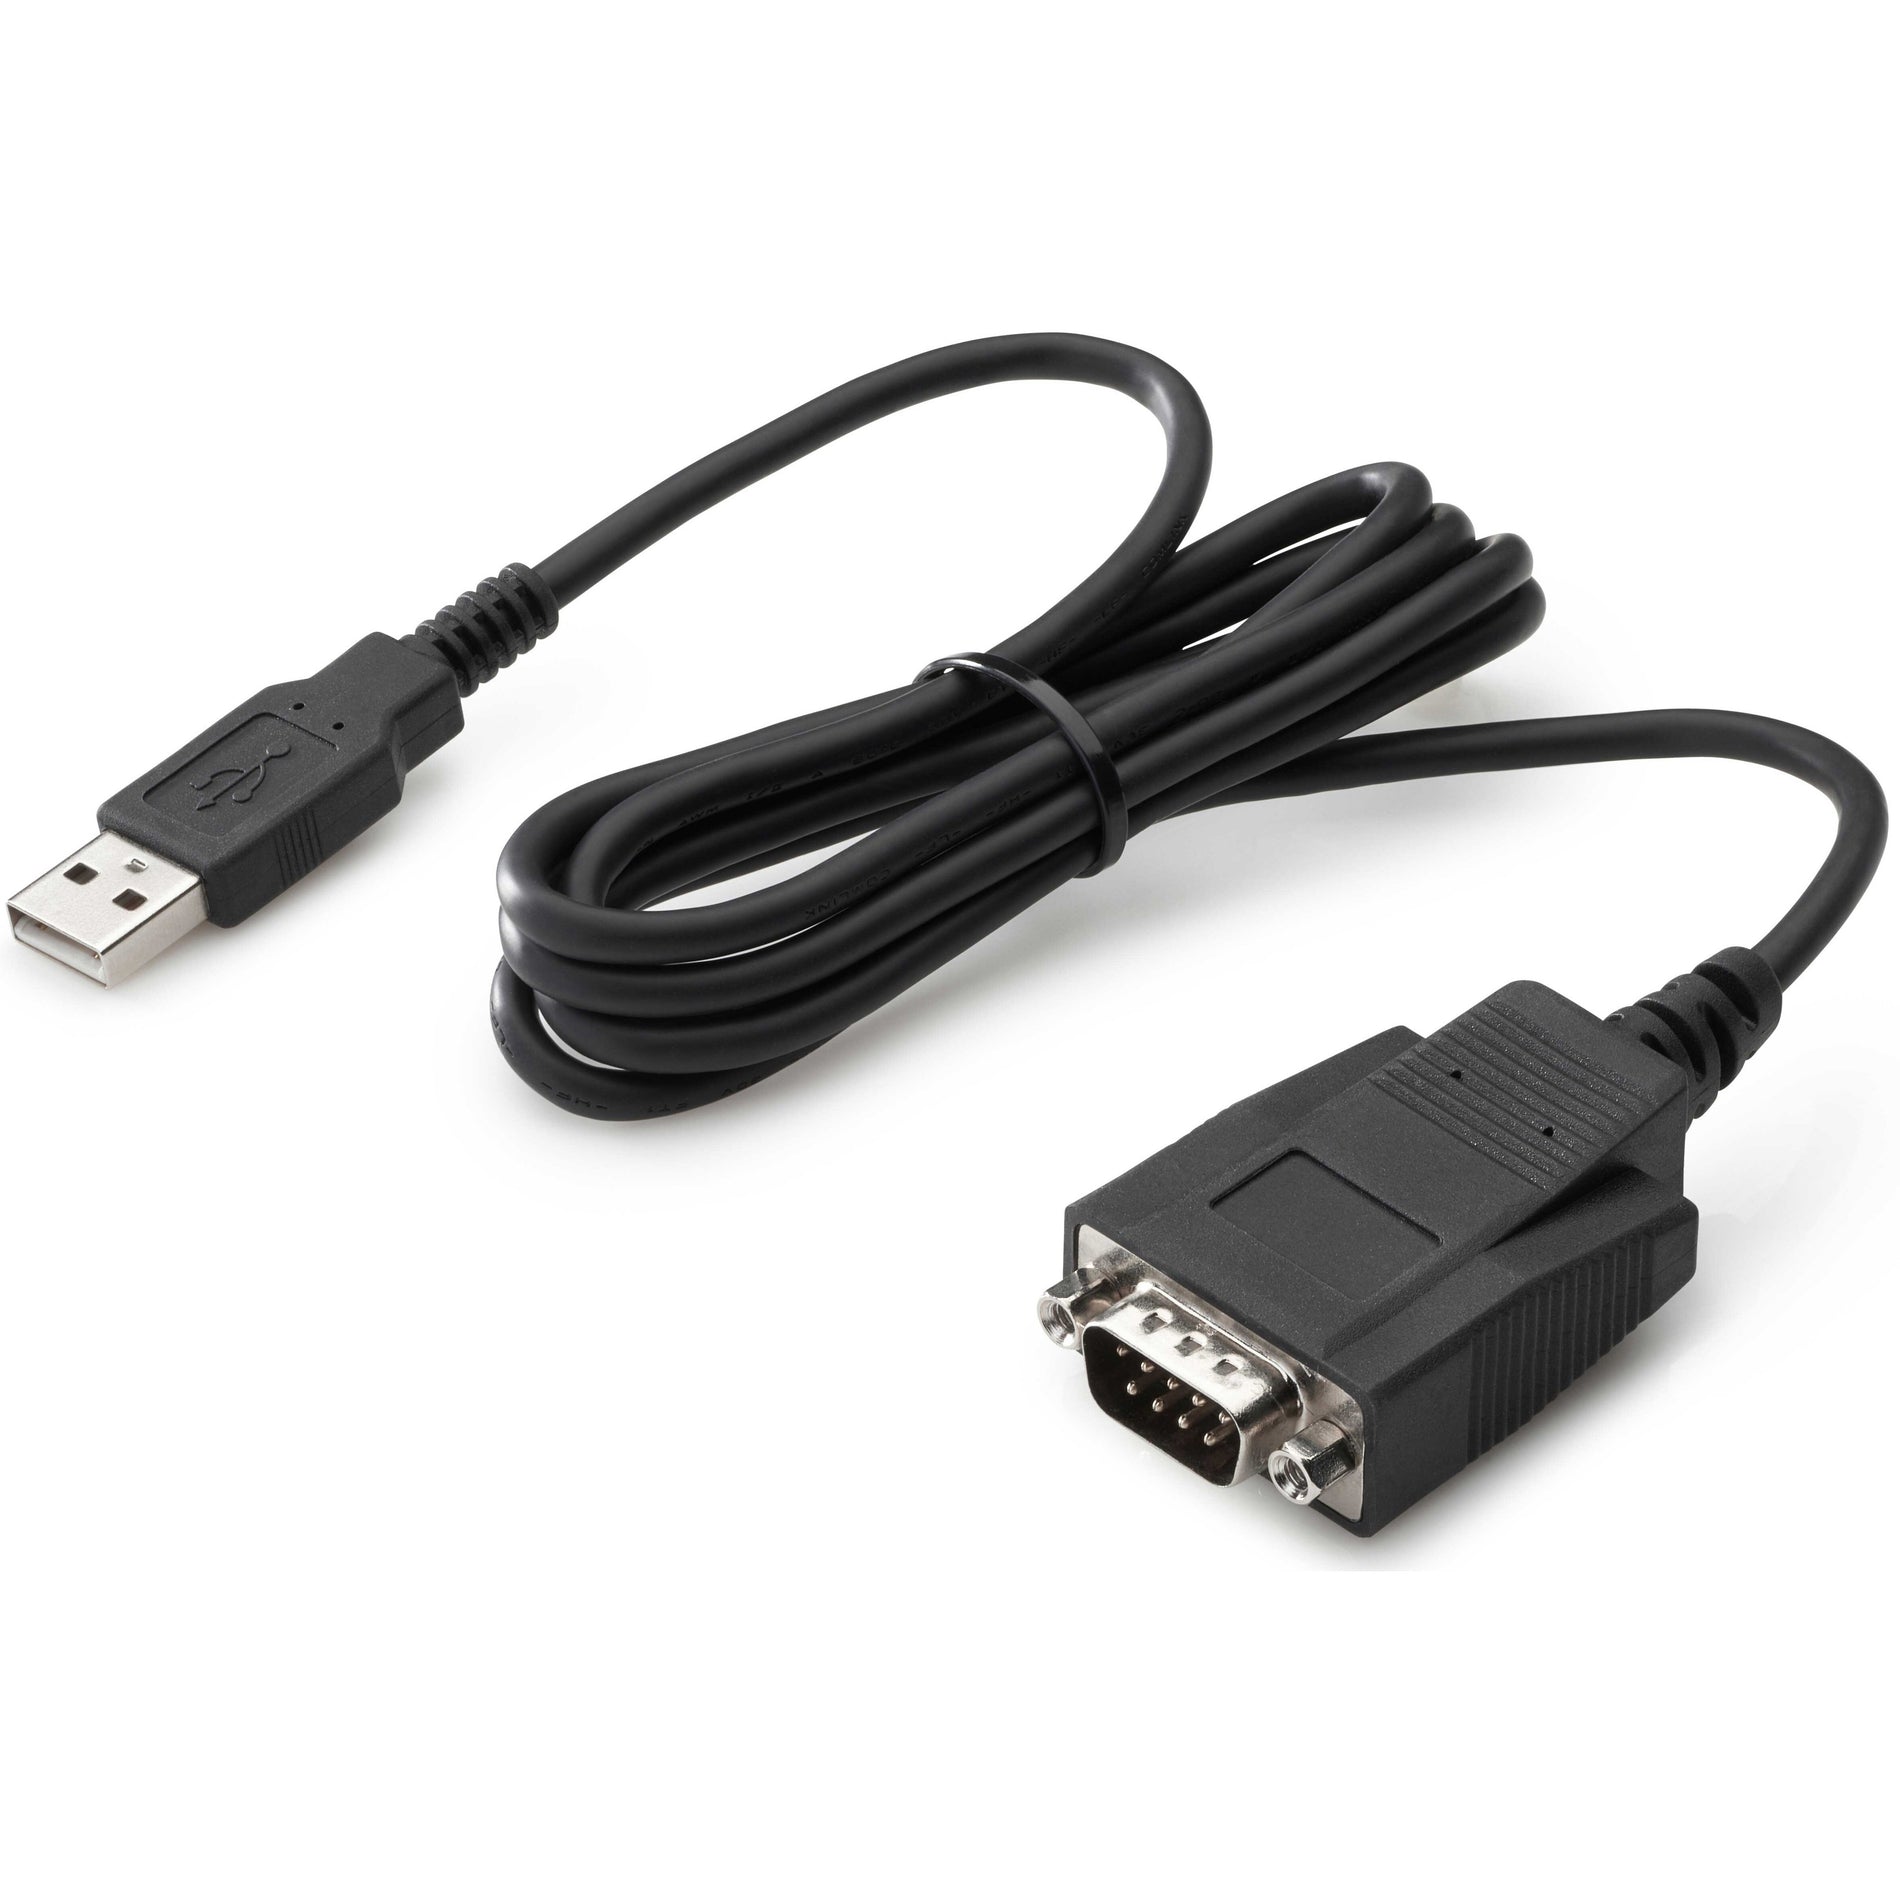 HP J7B60AA USB to Serial Port Adapter, Easy Data Transfer for PC and Desktop Computers